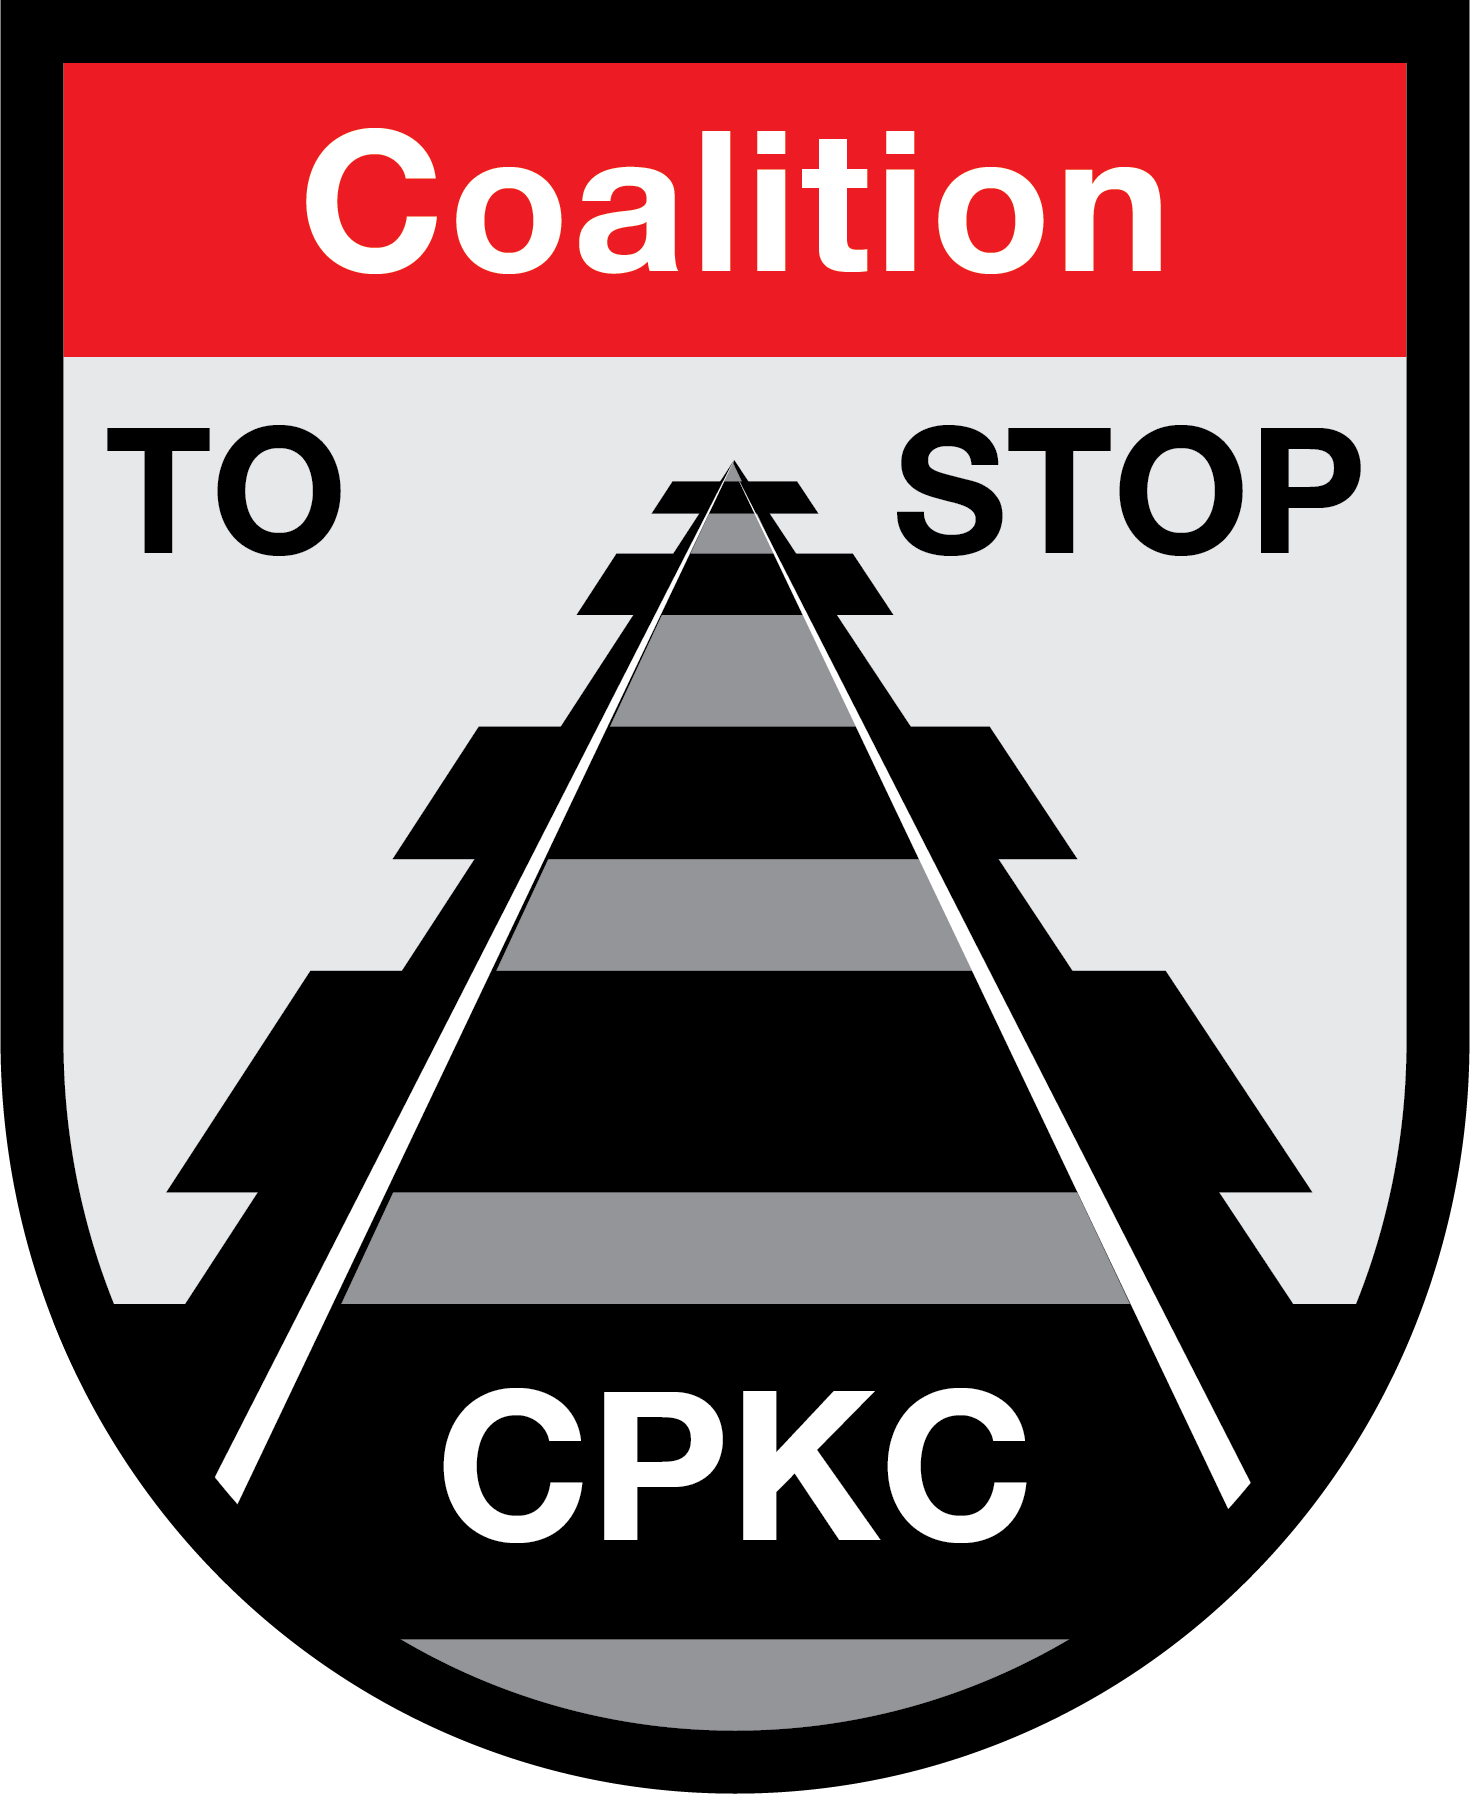 The Coalition to Stop CPKC